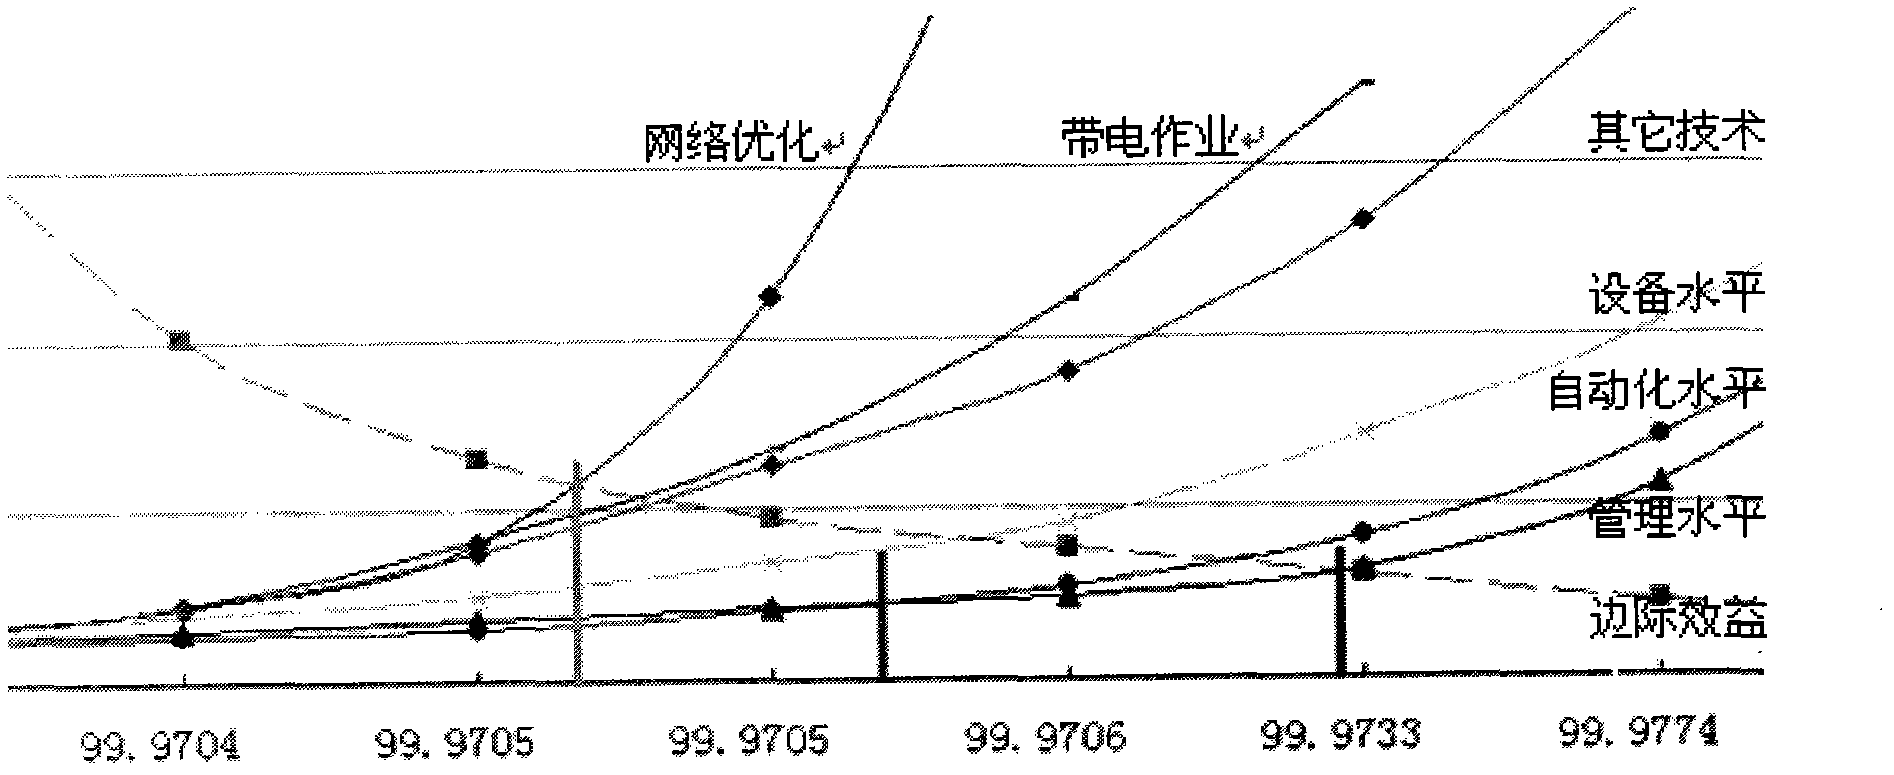 Method for analyzing and optimizing reliability cost/benefit precision of power supply